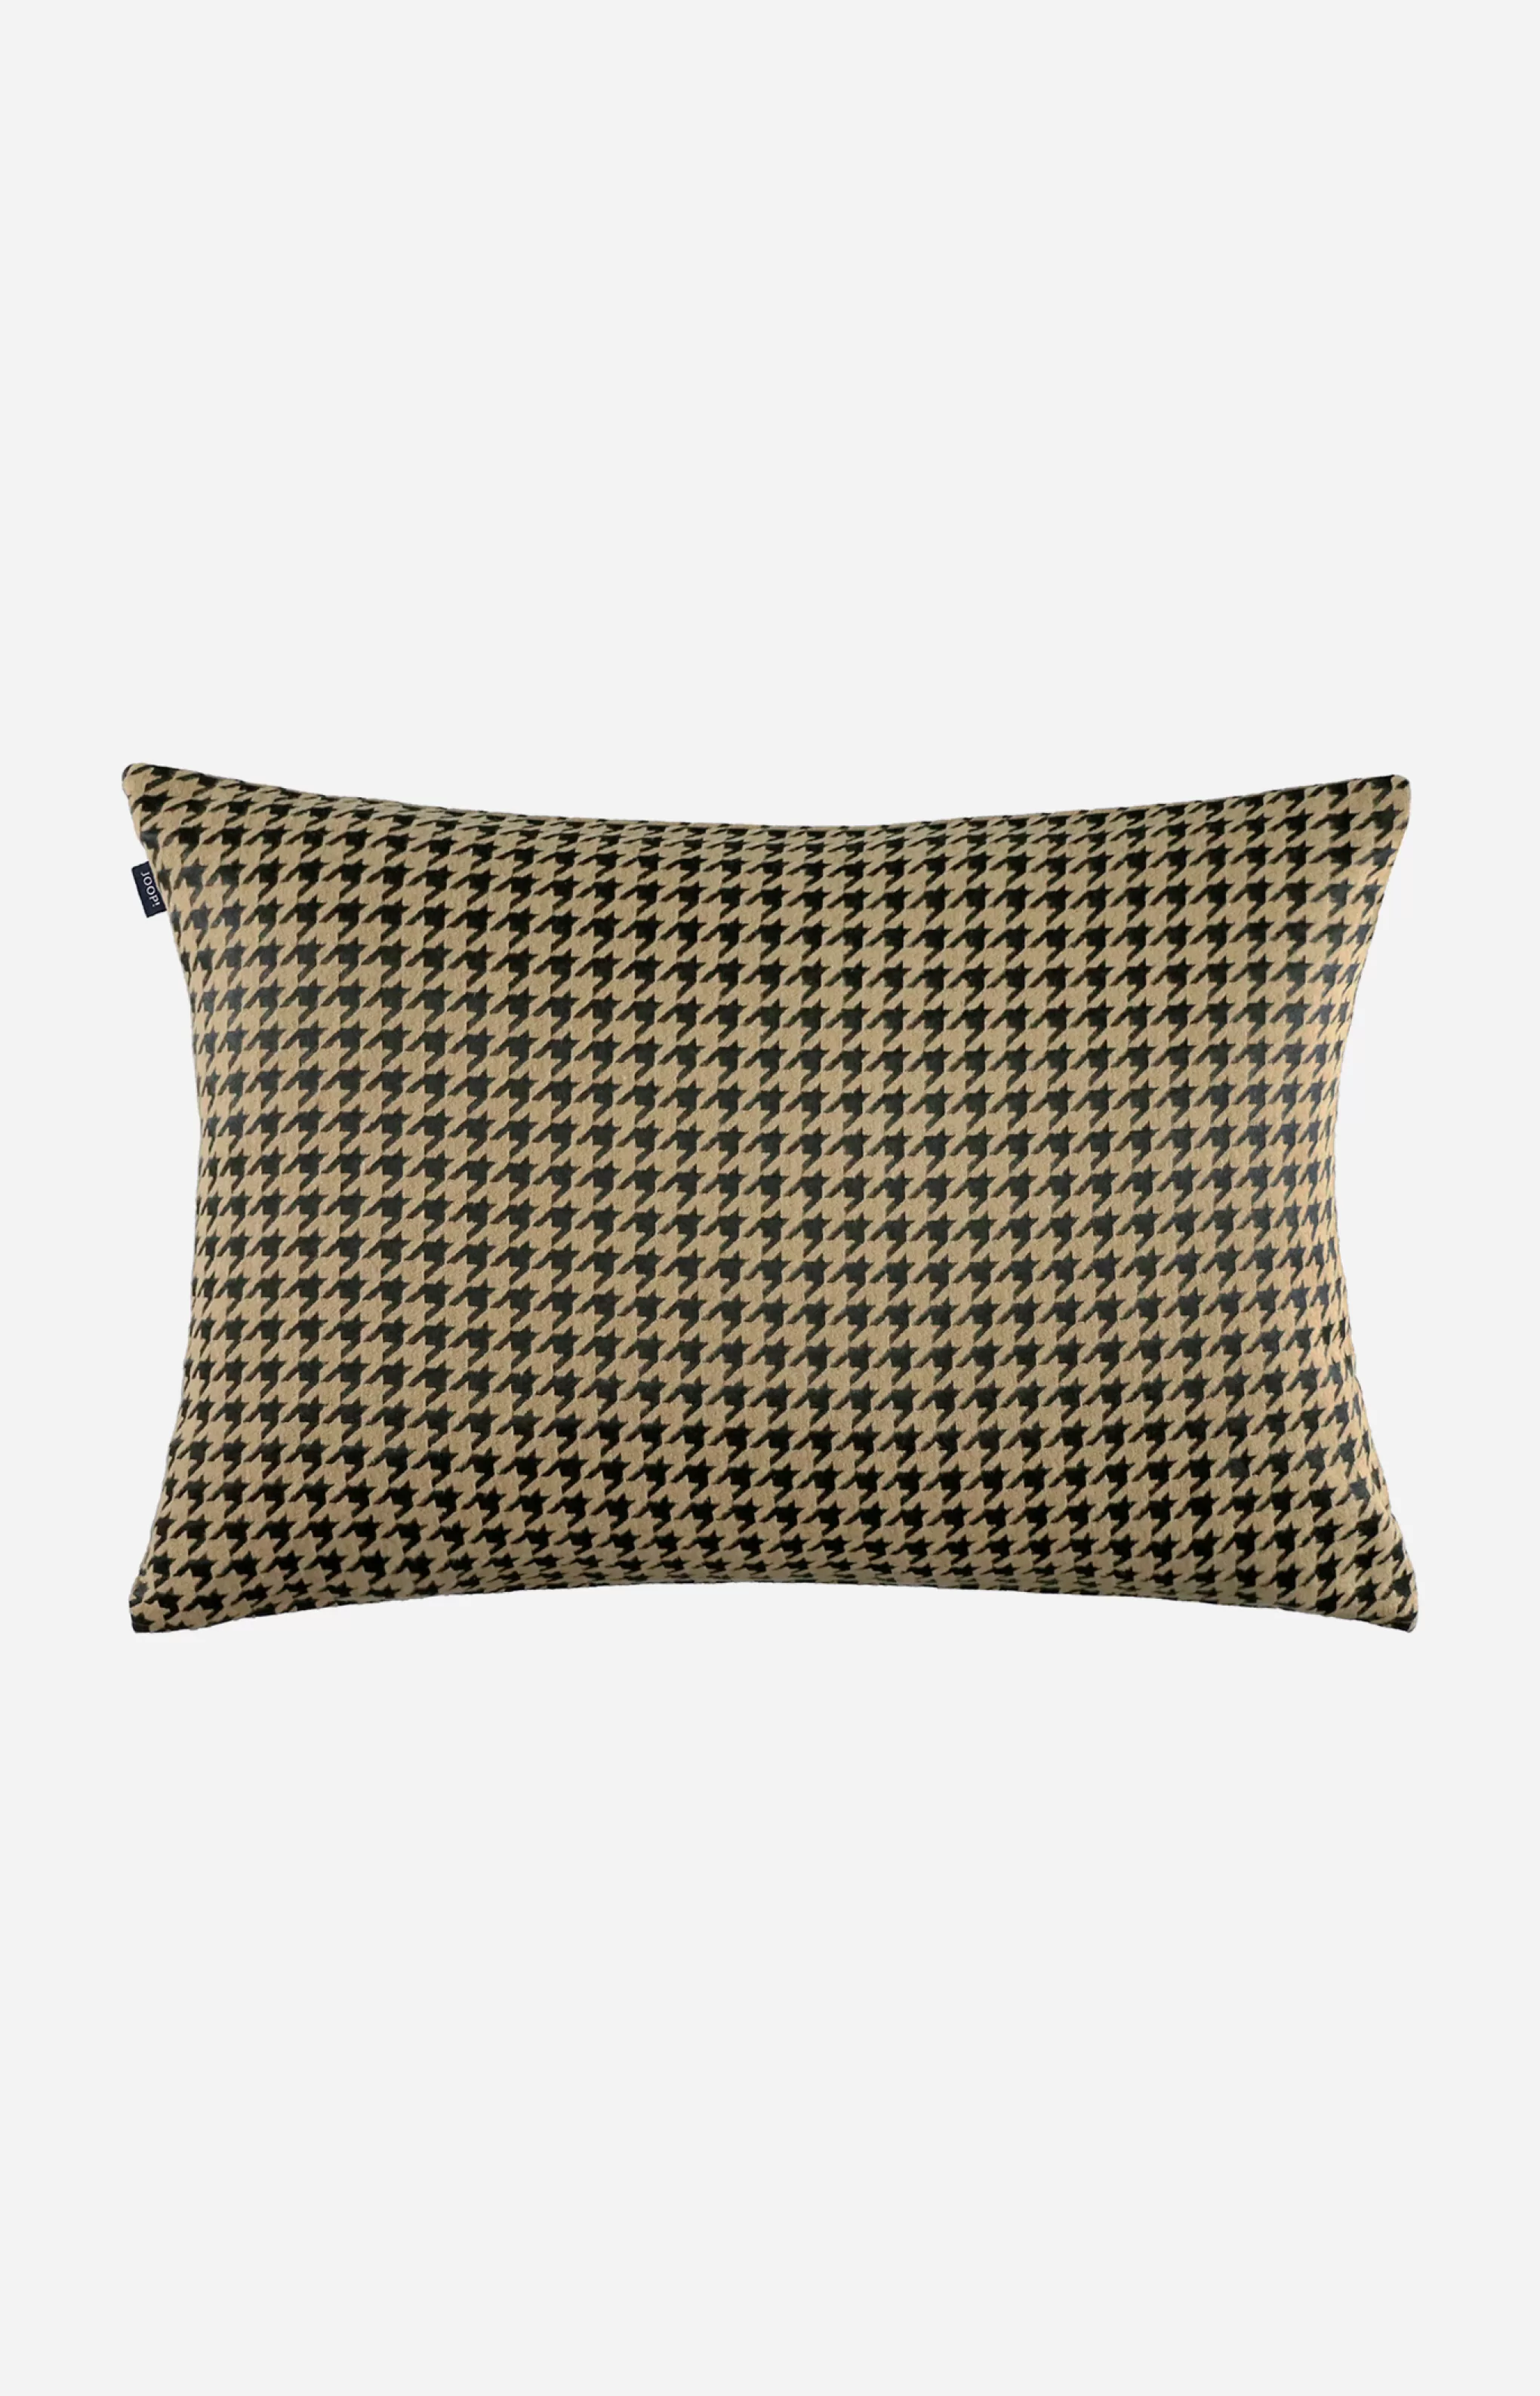 Decorative Cushions | Discover Everything*JOOP Decorative Cushions | Discover Everything ! MODISH Decorative Cushion Cover in